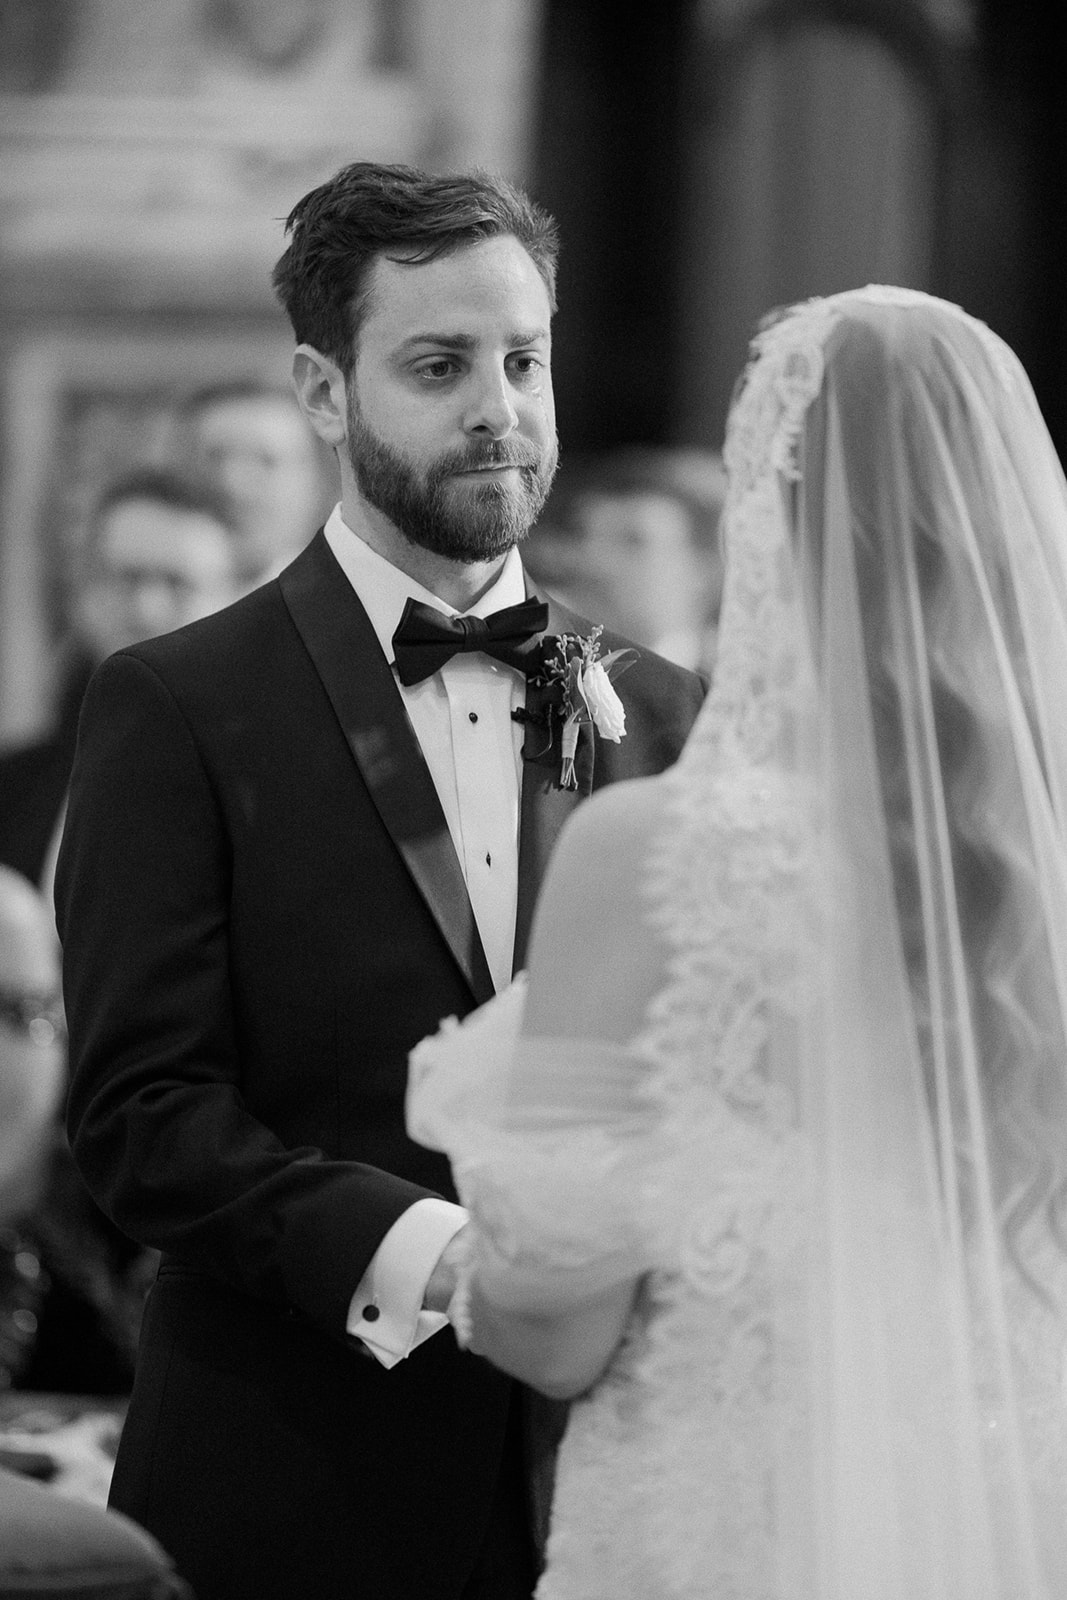 groom sheds a tear during vow exchange during ceremony